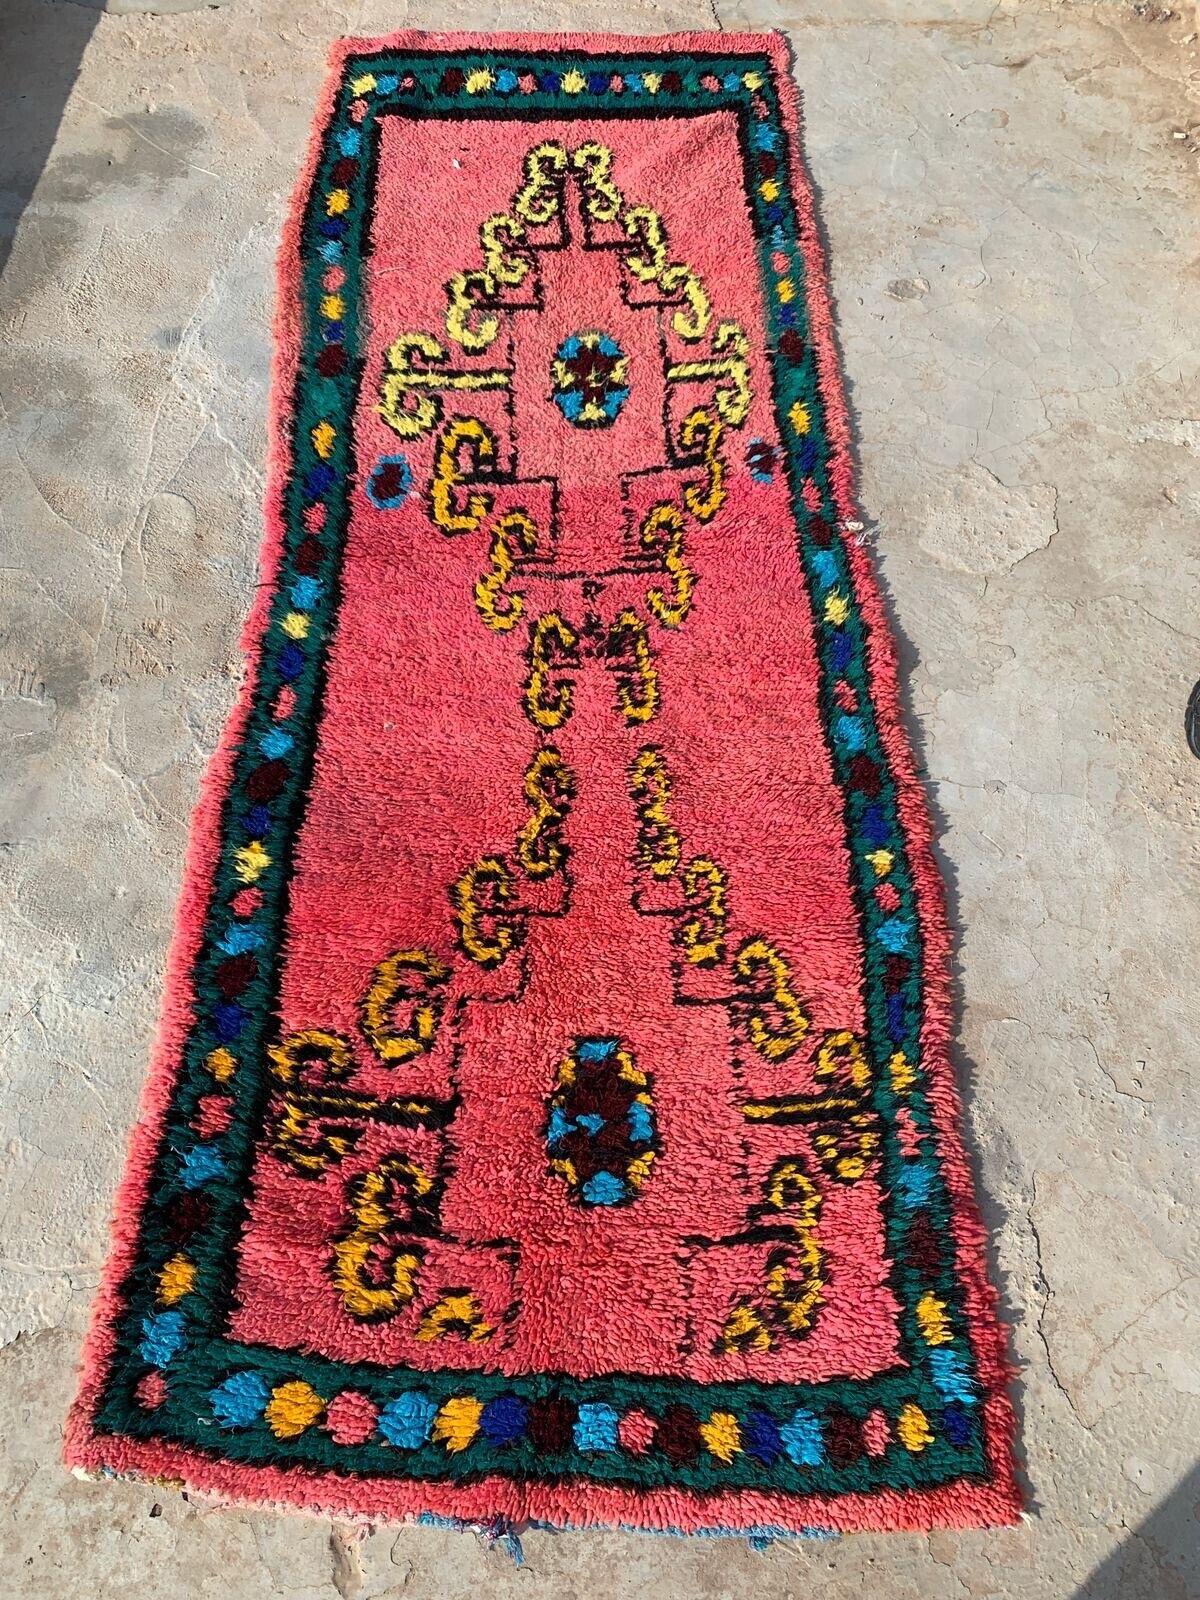 Side angle view of the runner, emphasizing its size and vintage elegance